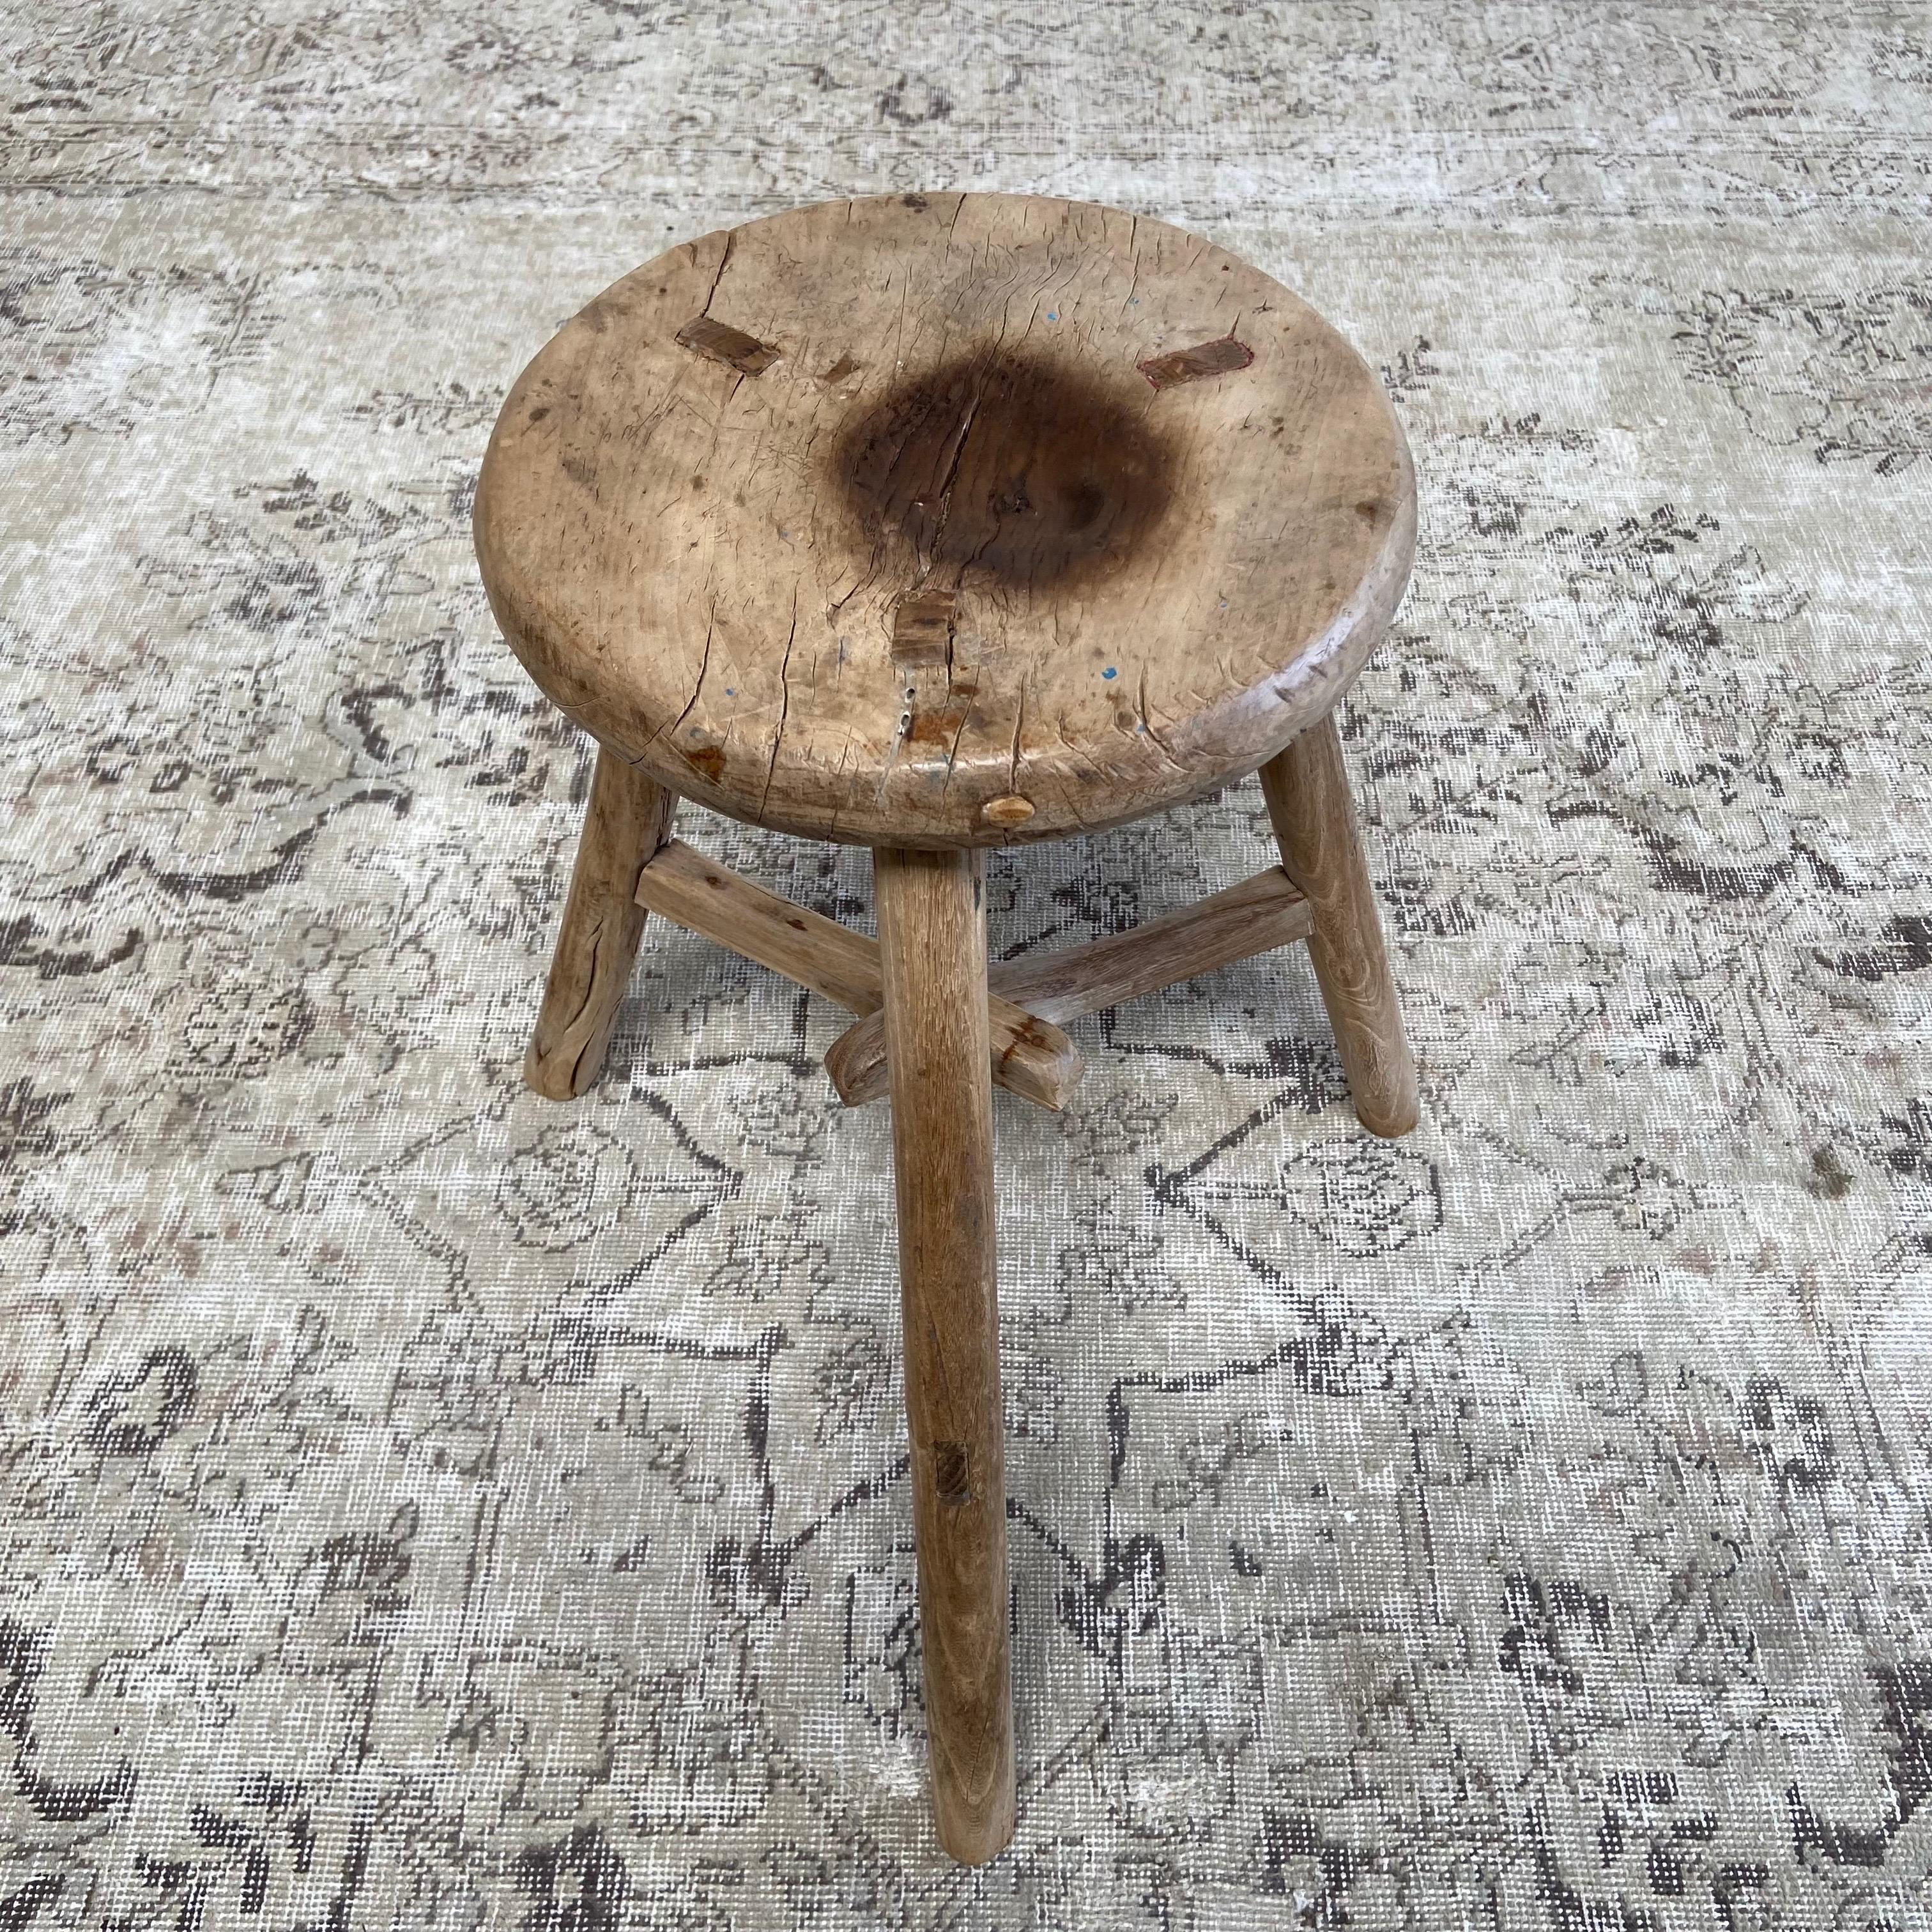 These are the real vintage antique elm wood stools! Beautiful antique patina, with weathering and age, these are solid and sturdy ready for daily use, use as a table, stool, drink table, they are great for any space.

Elm stool 19”w x 17”d x